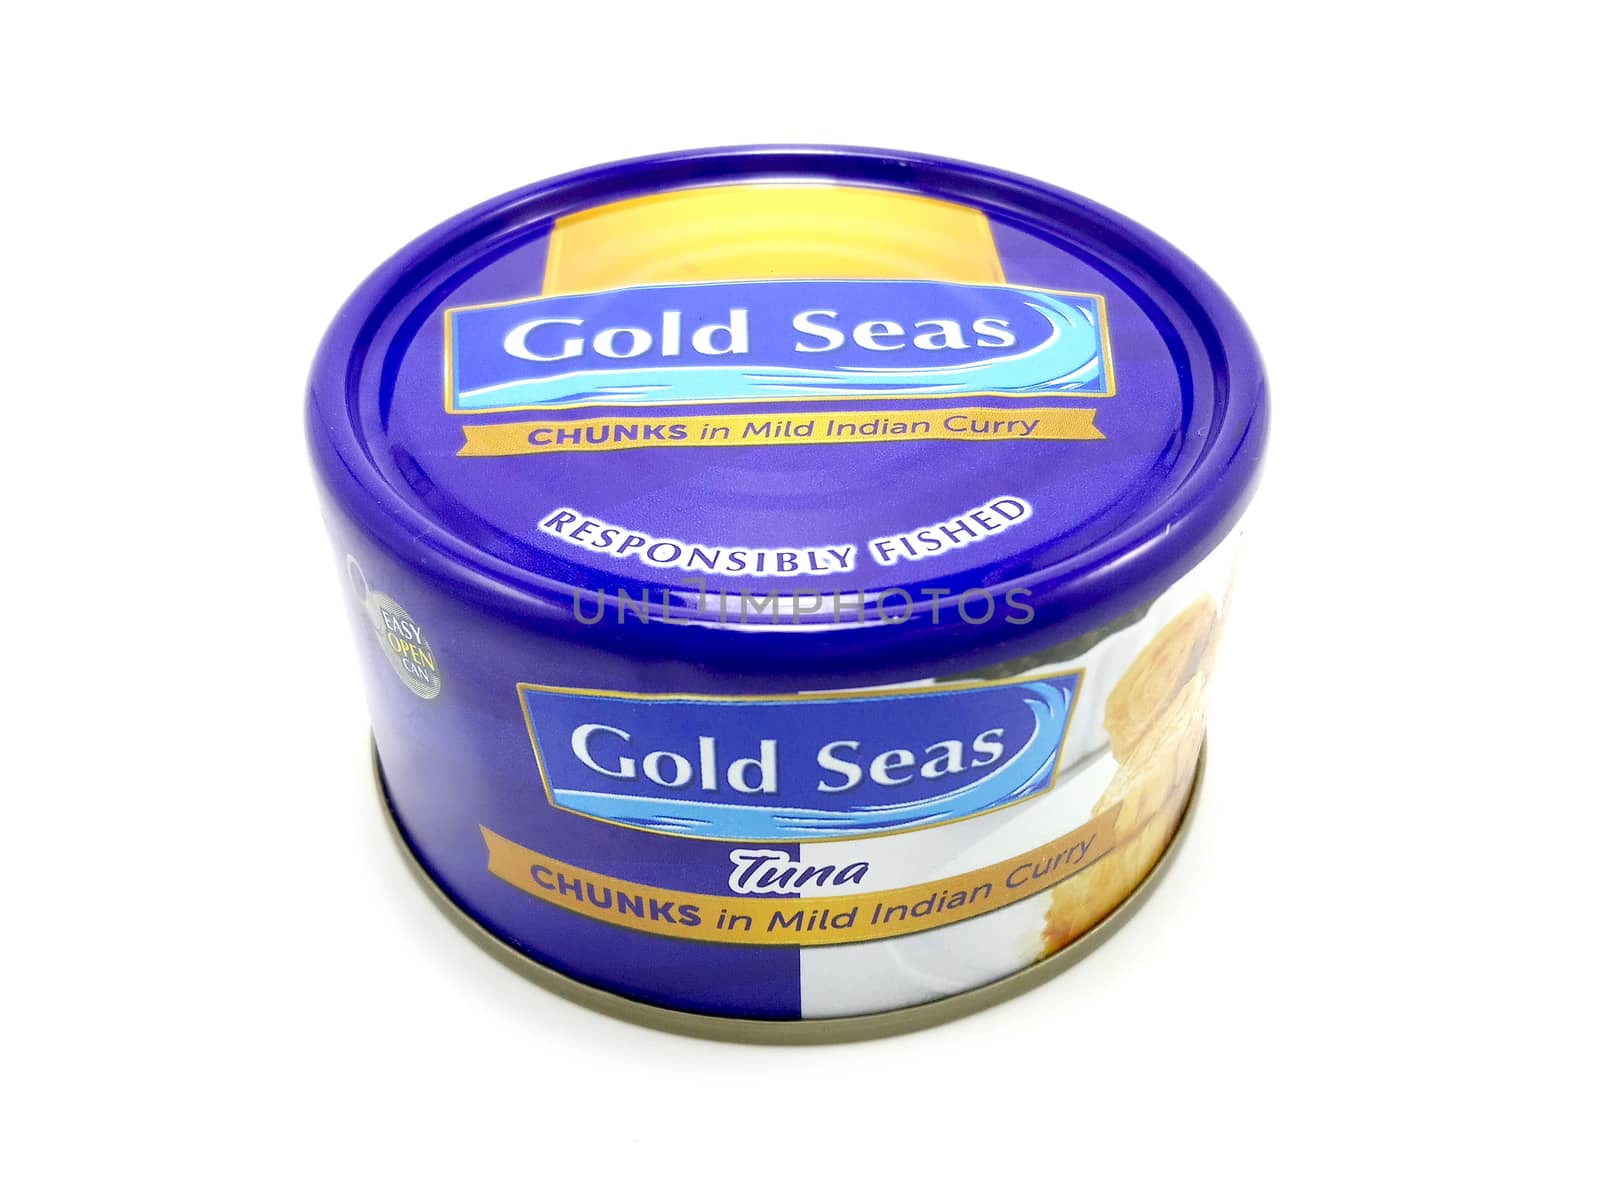 Gold seas tuna chunks mild Indian curry can in Manila, Philippin by imwaltersy